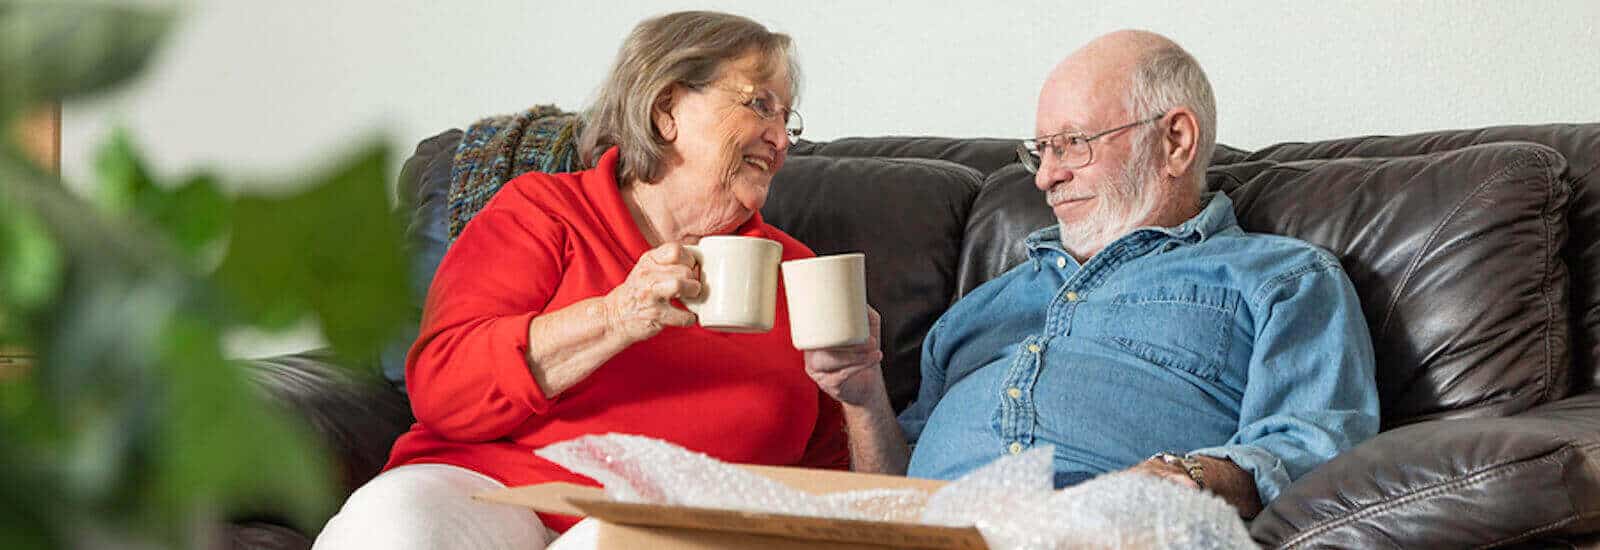 couple having a cup of coffee